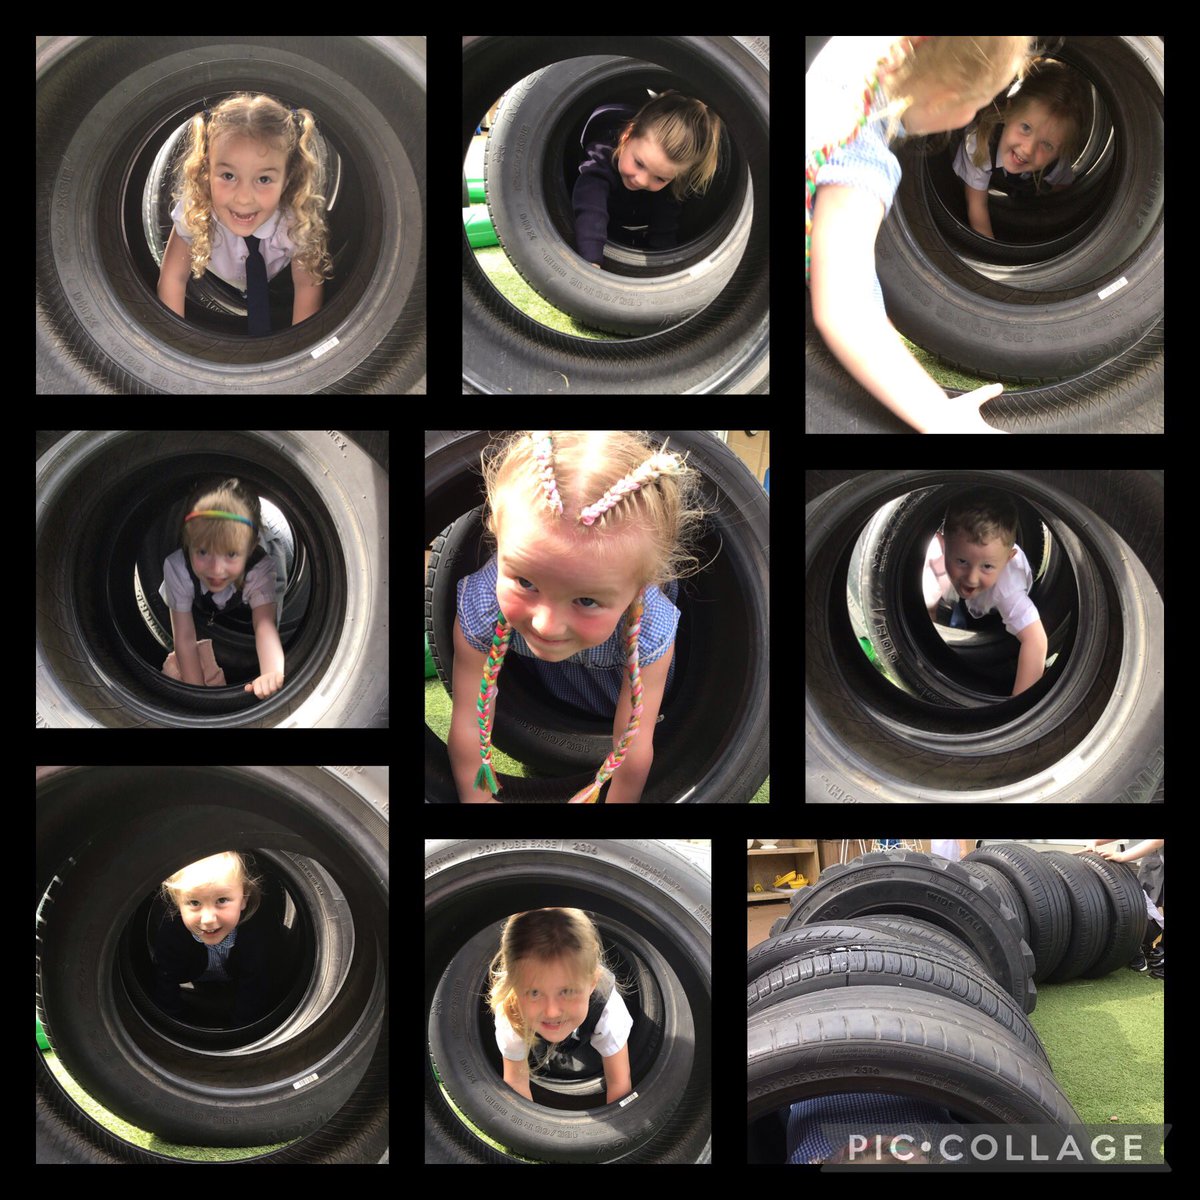 Our gross motor skills are being tested this morning! 🦵🏼💪🏻Curious Creators have loved this obstacle course tunnel! 😃
#PhysicalDevelopment